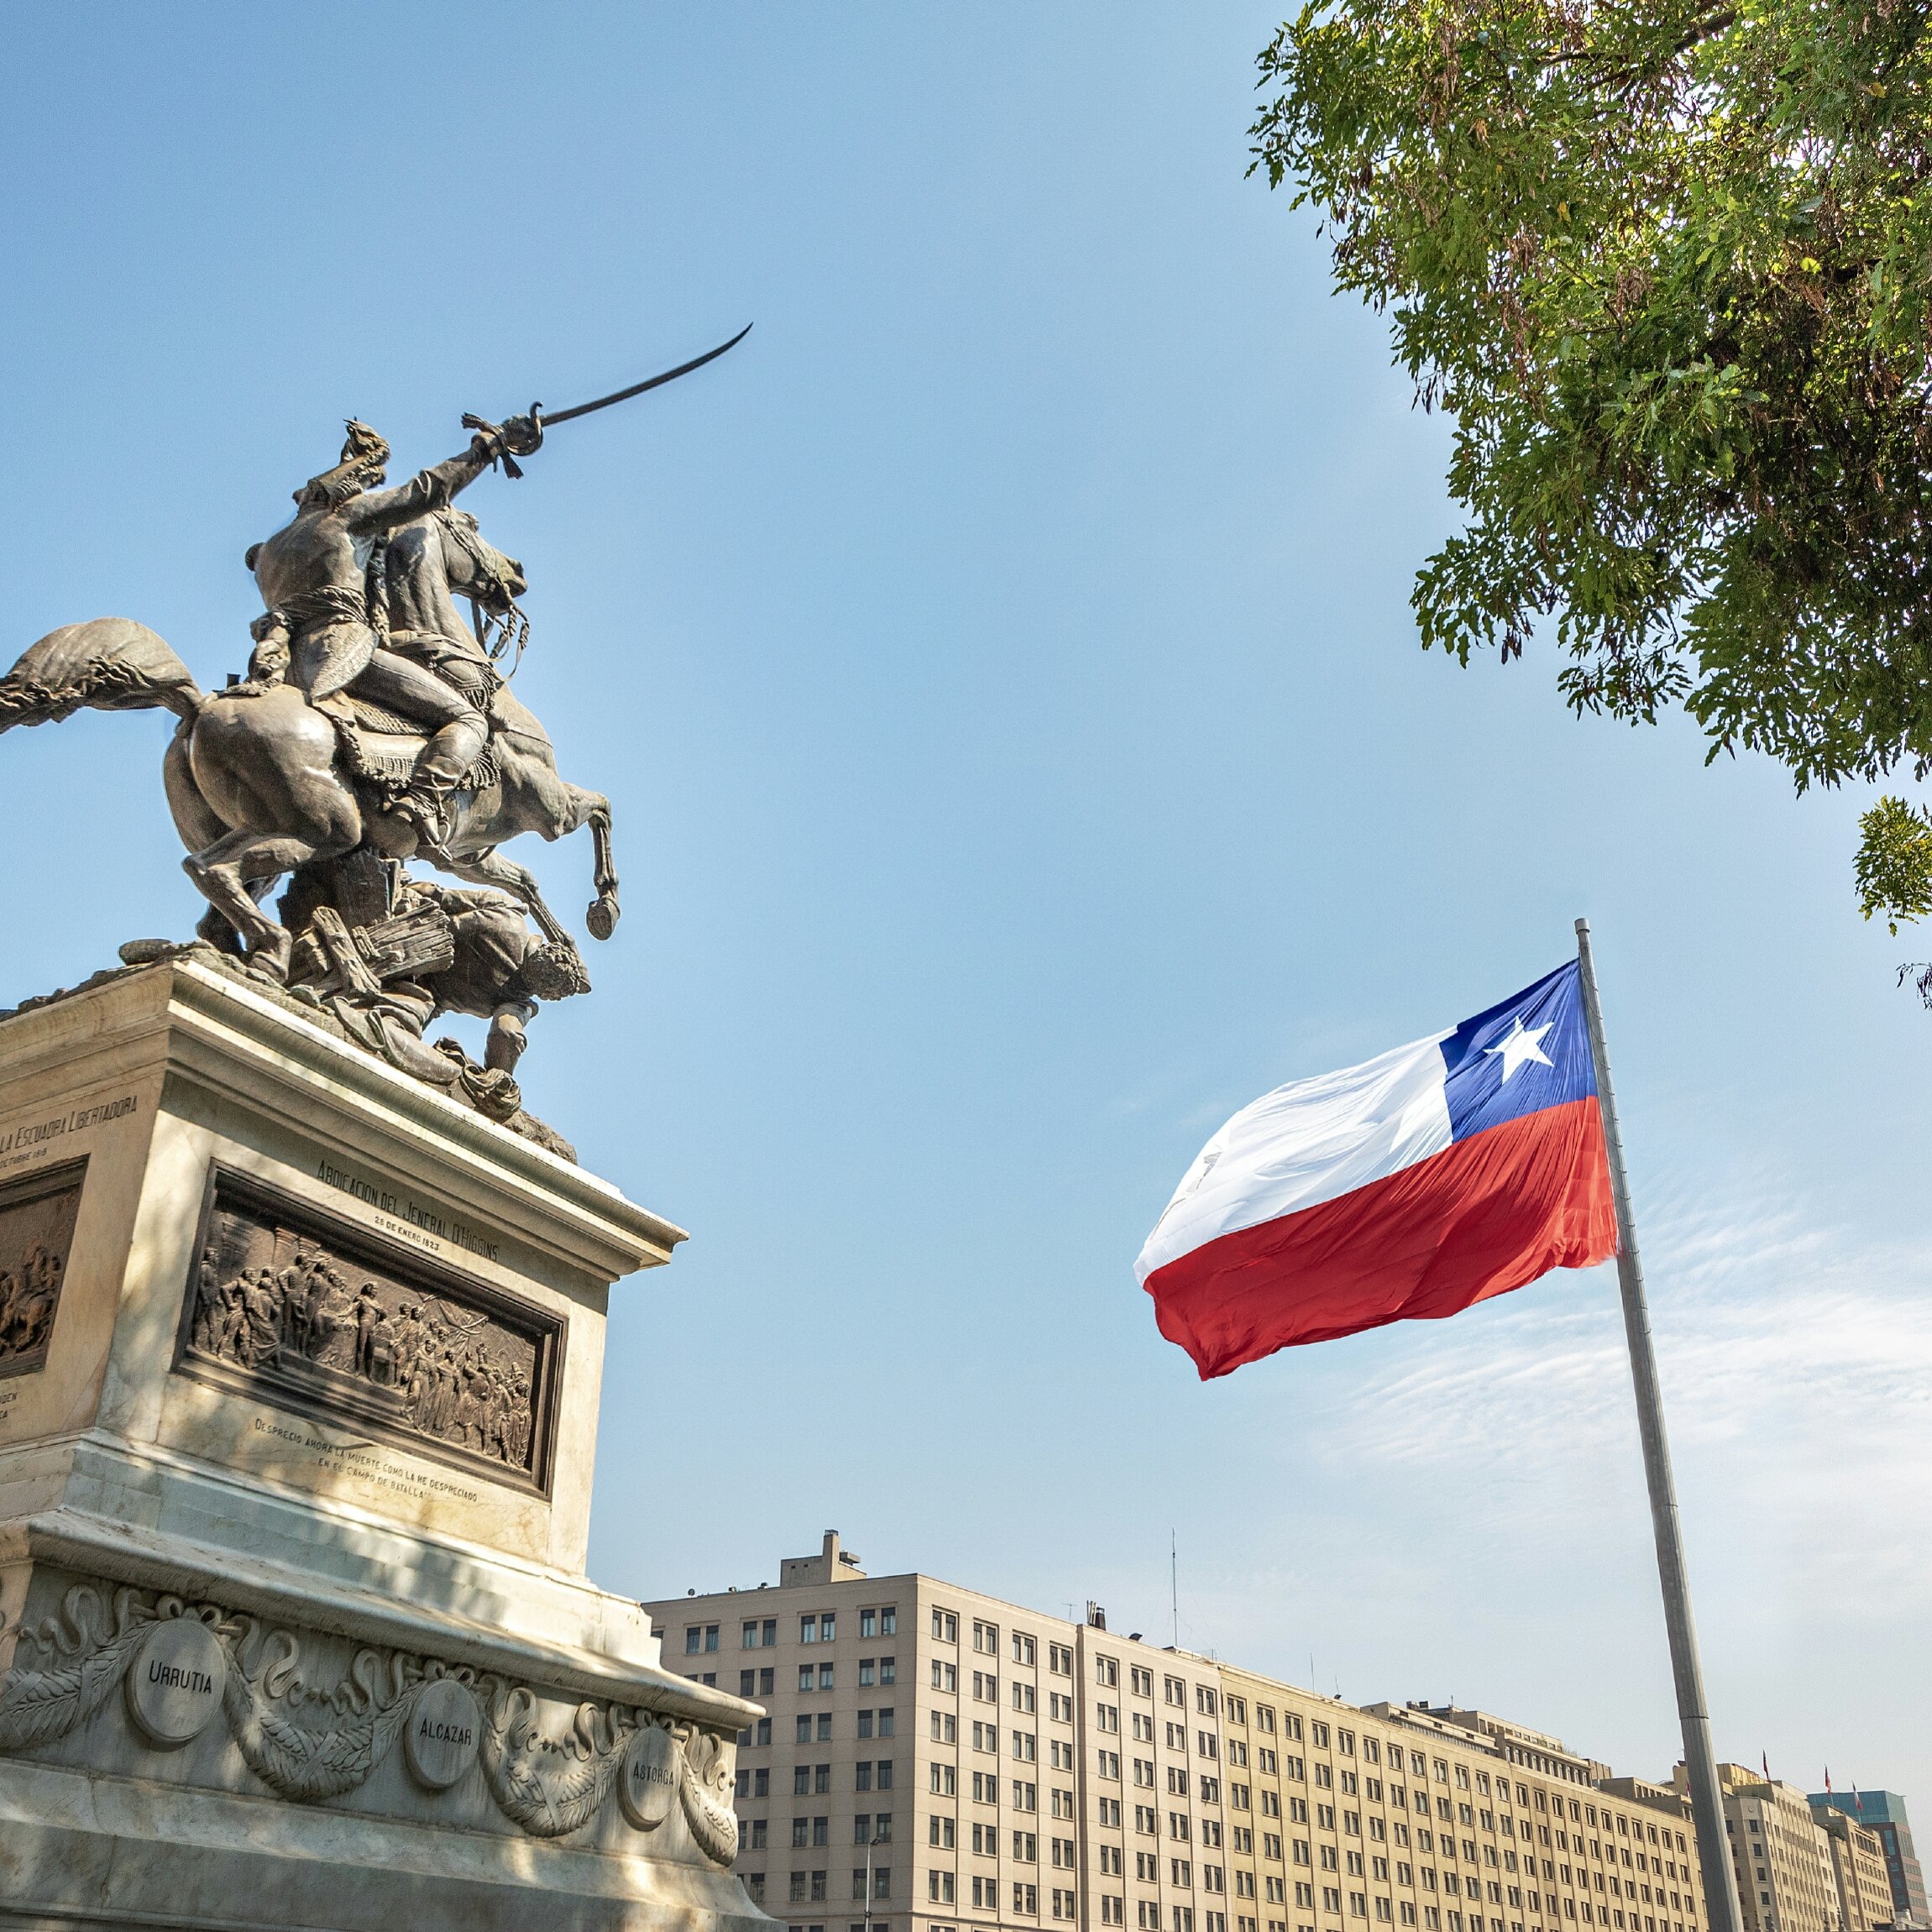 Chile to Start Taxing Cryptocurrency Earnings in Second Quarter of 2019